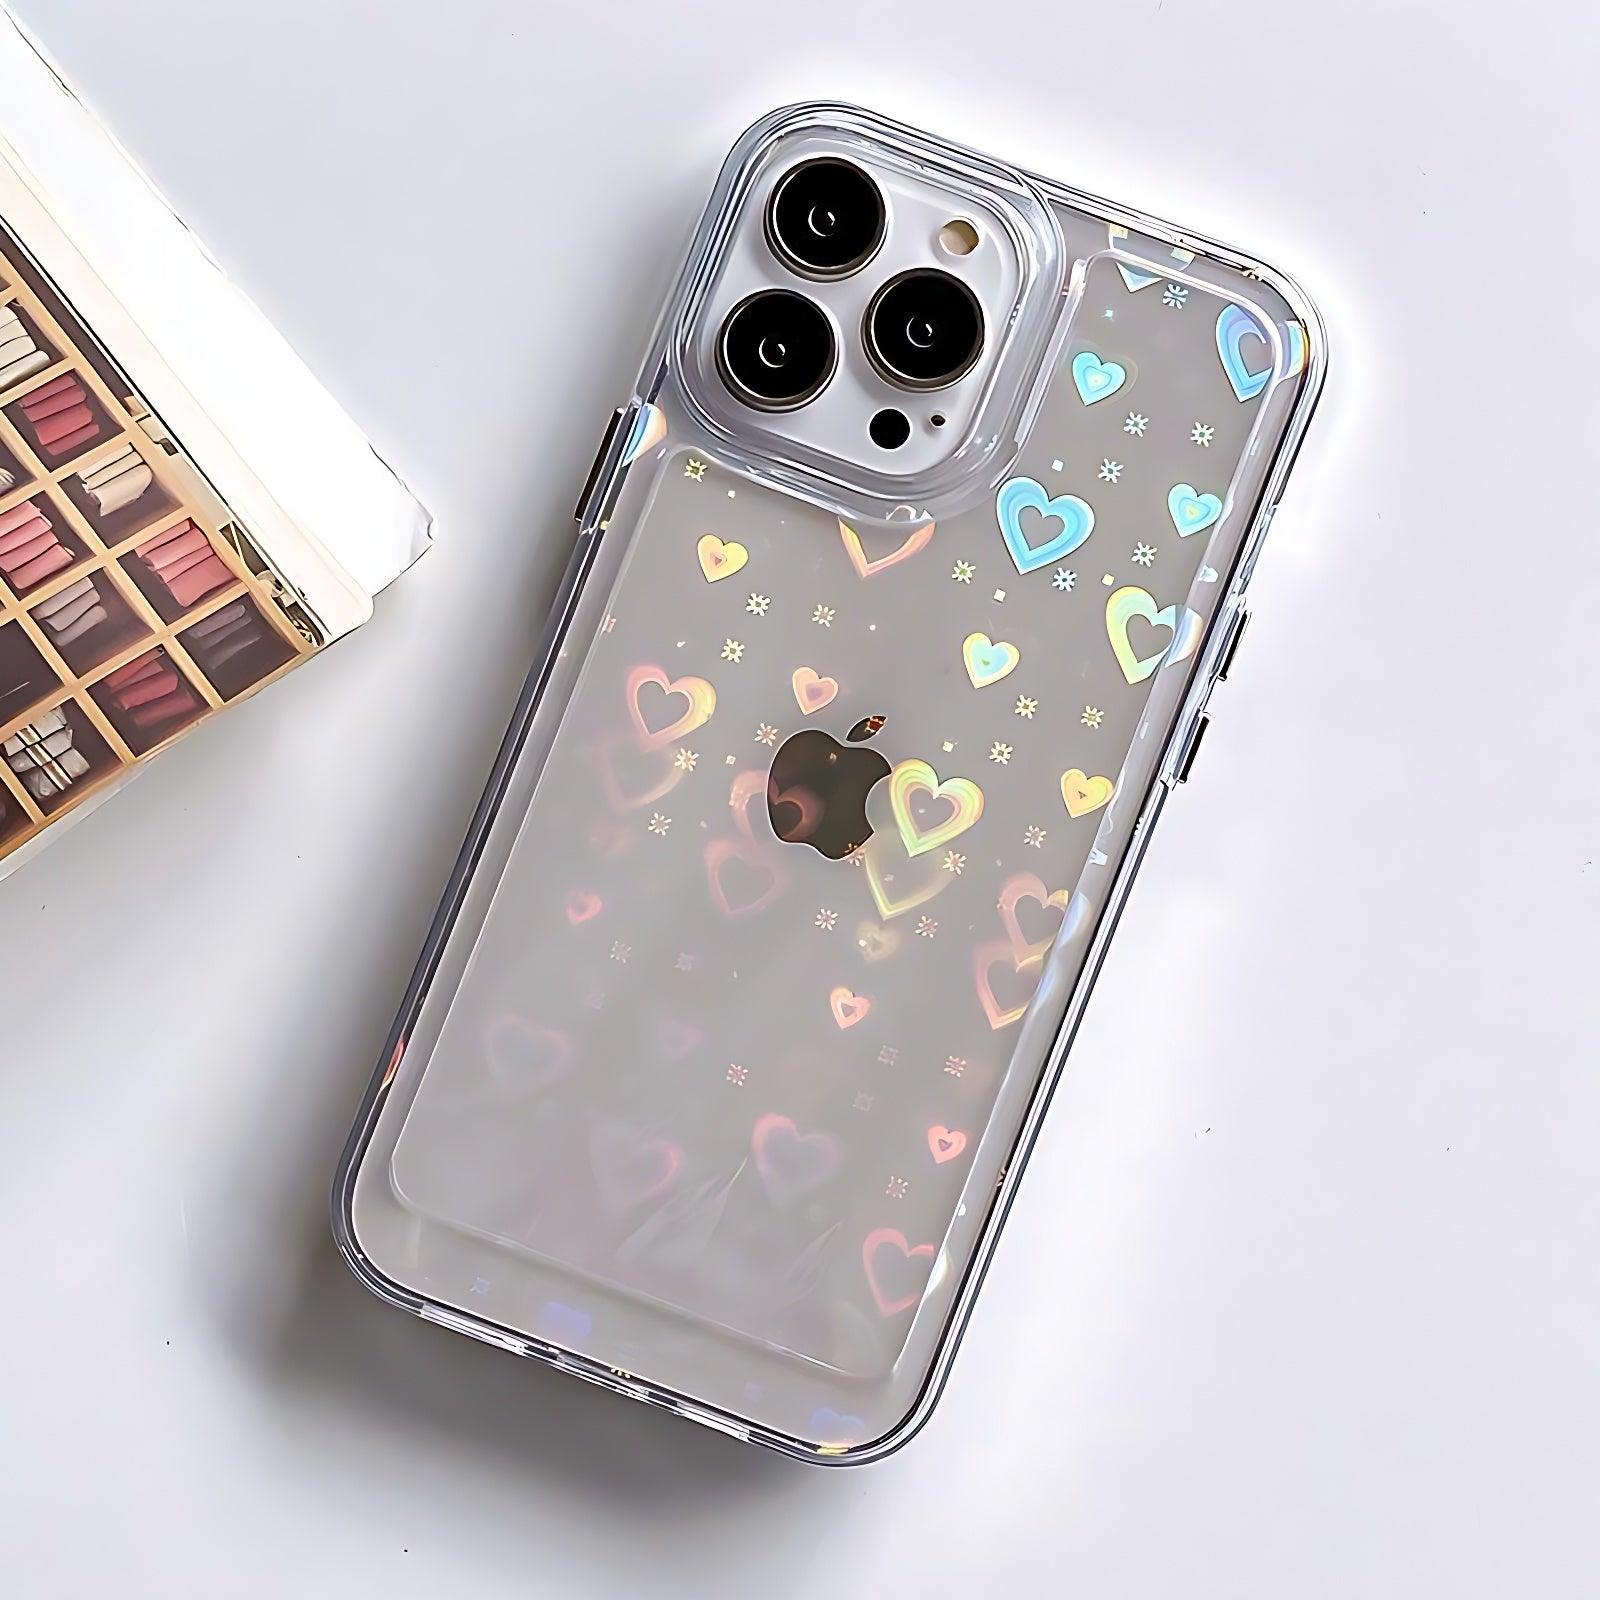 Clear iPhone 11 Case - Touchy Style .